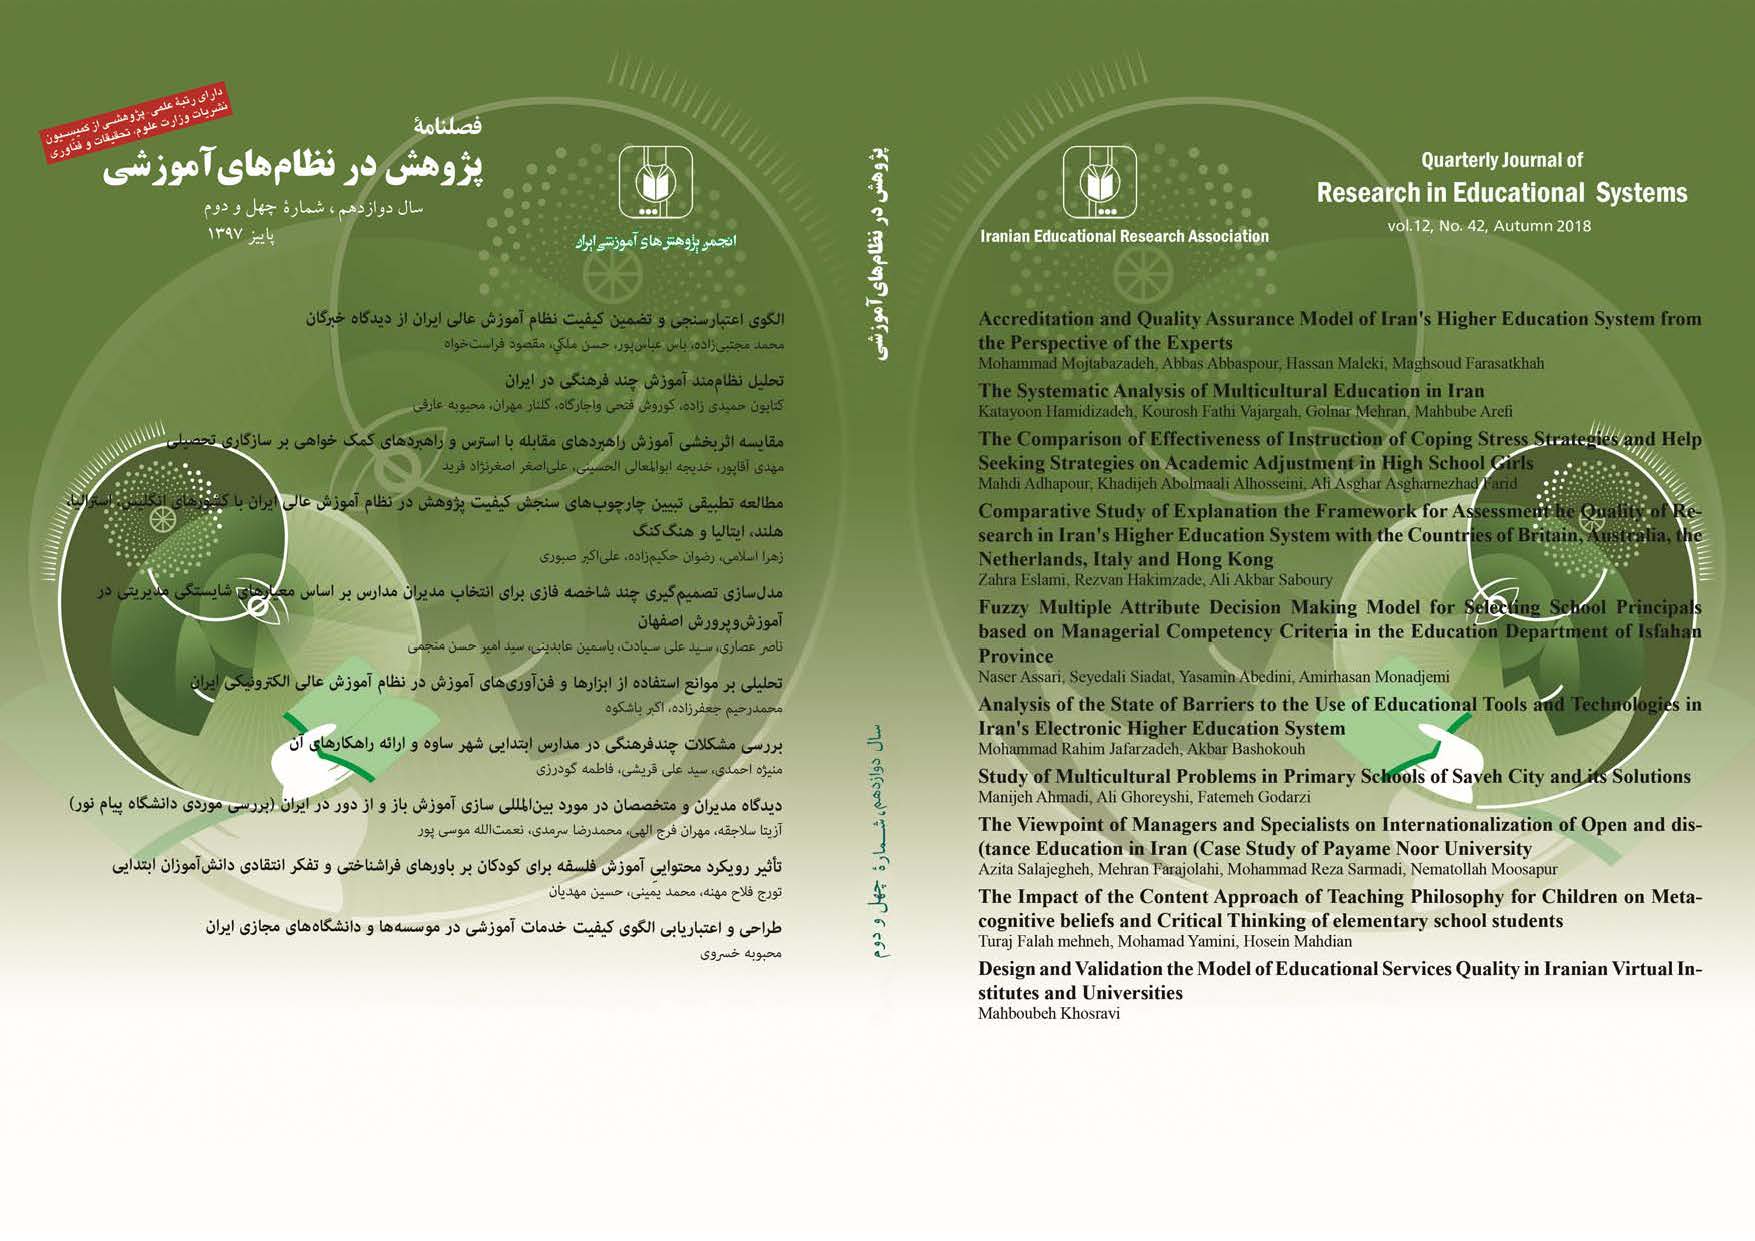 Journal of Research in Educational Systems